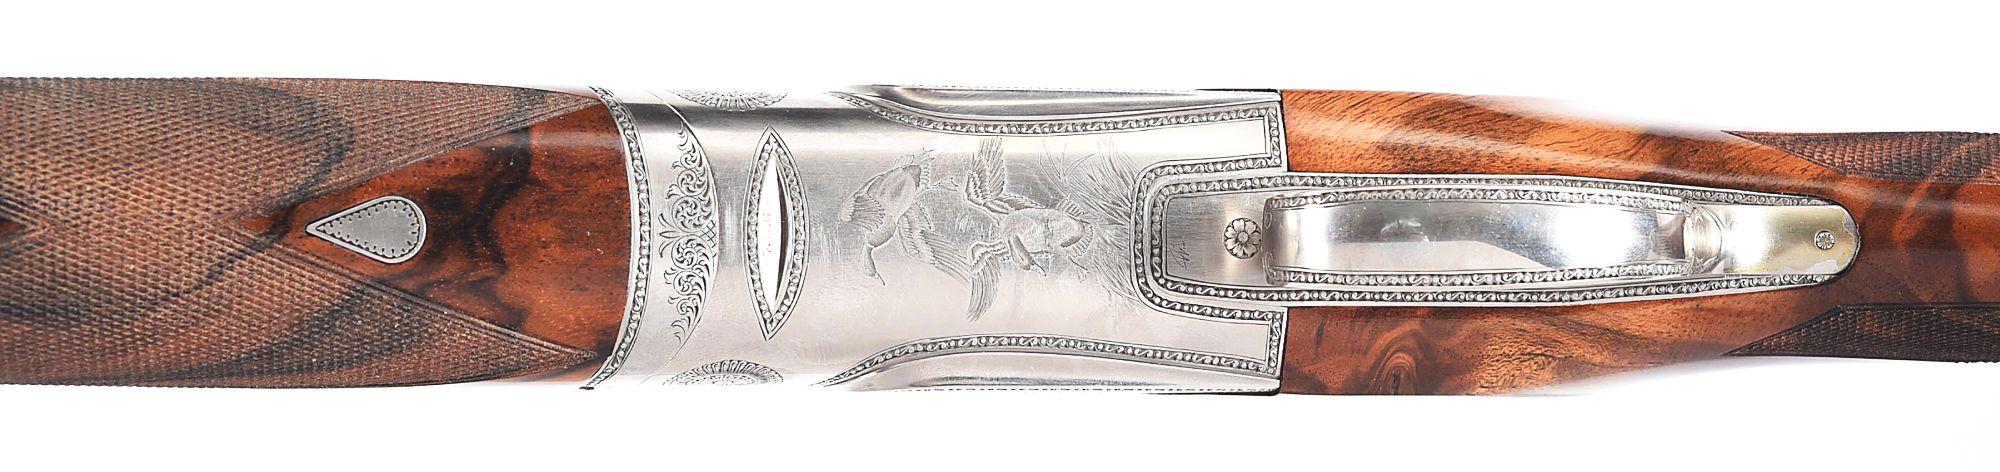 (M) LUCIANO BOSIS WILD EXTRA 12 BORE OVER/UNDER SHOTGUN WITH EXTRA BARREL, CASE, ENGRAVED BY PARRAVI